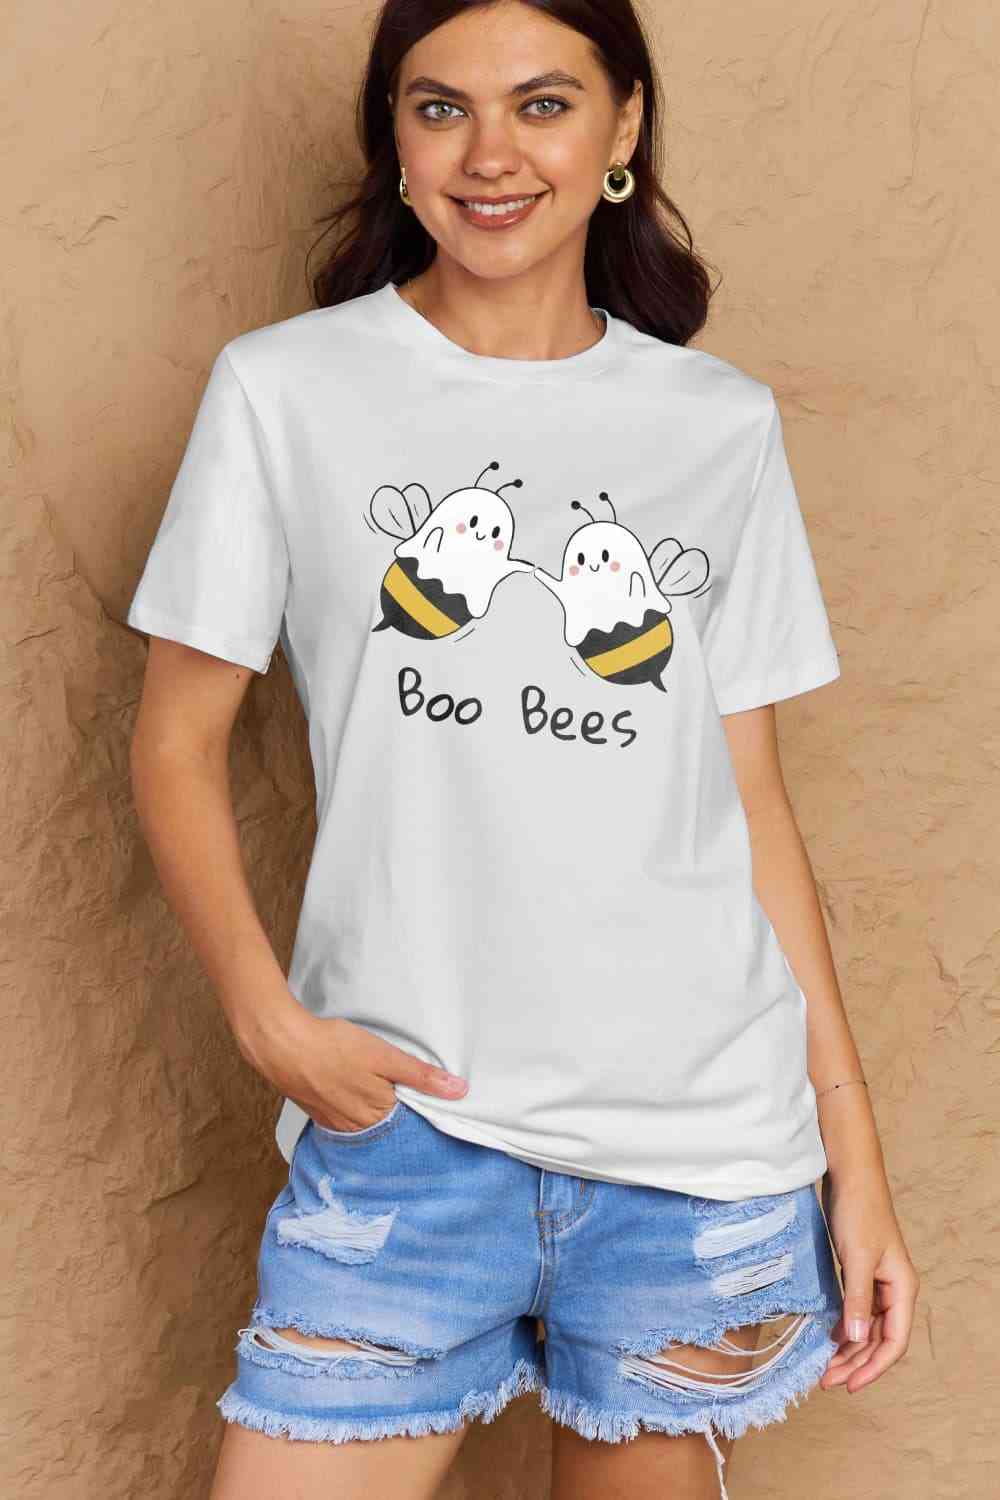 BOO BEES Graphic Cotton T-Shirt - White / S - T-Shirts - Shirts & Tops - 7 - 2024